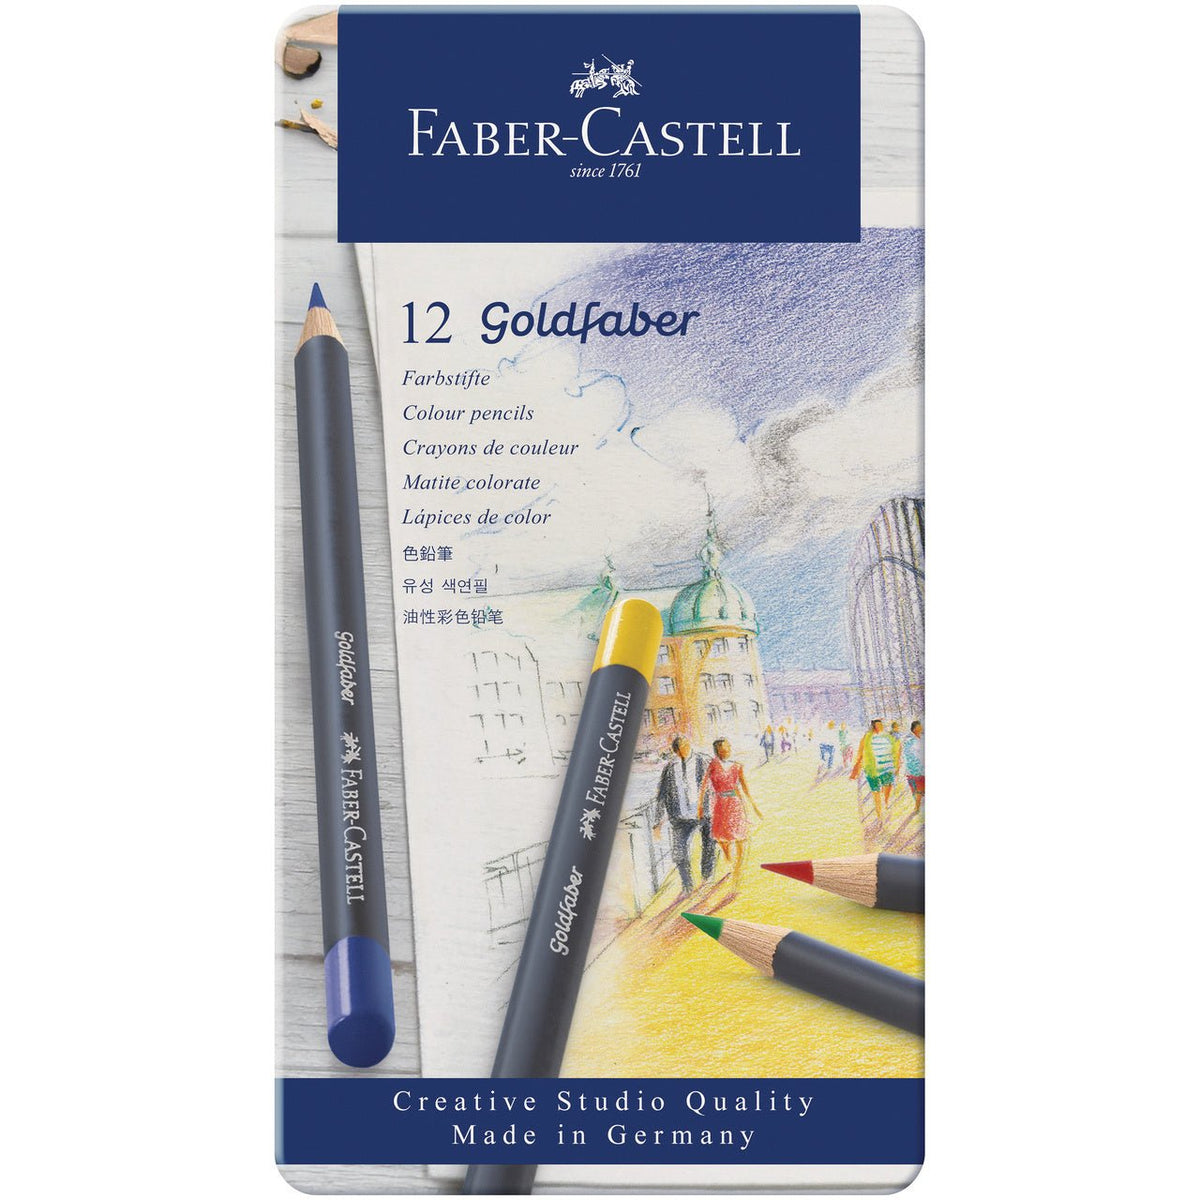 Faber-Castell Goldfaber Colored Pencil 12 Color Set in Metal Tin - merriartist.com